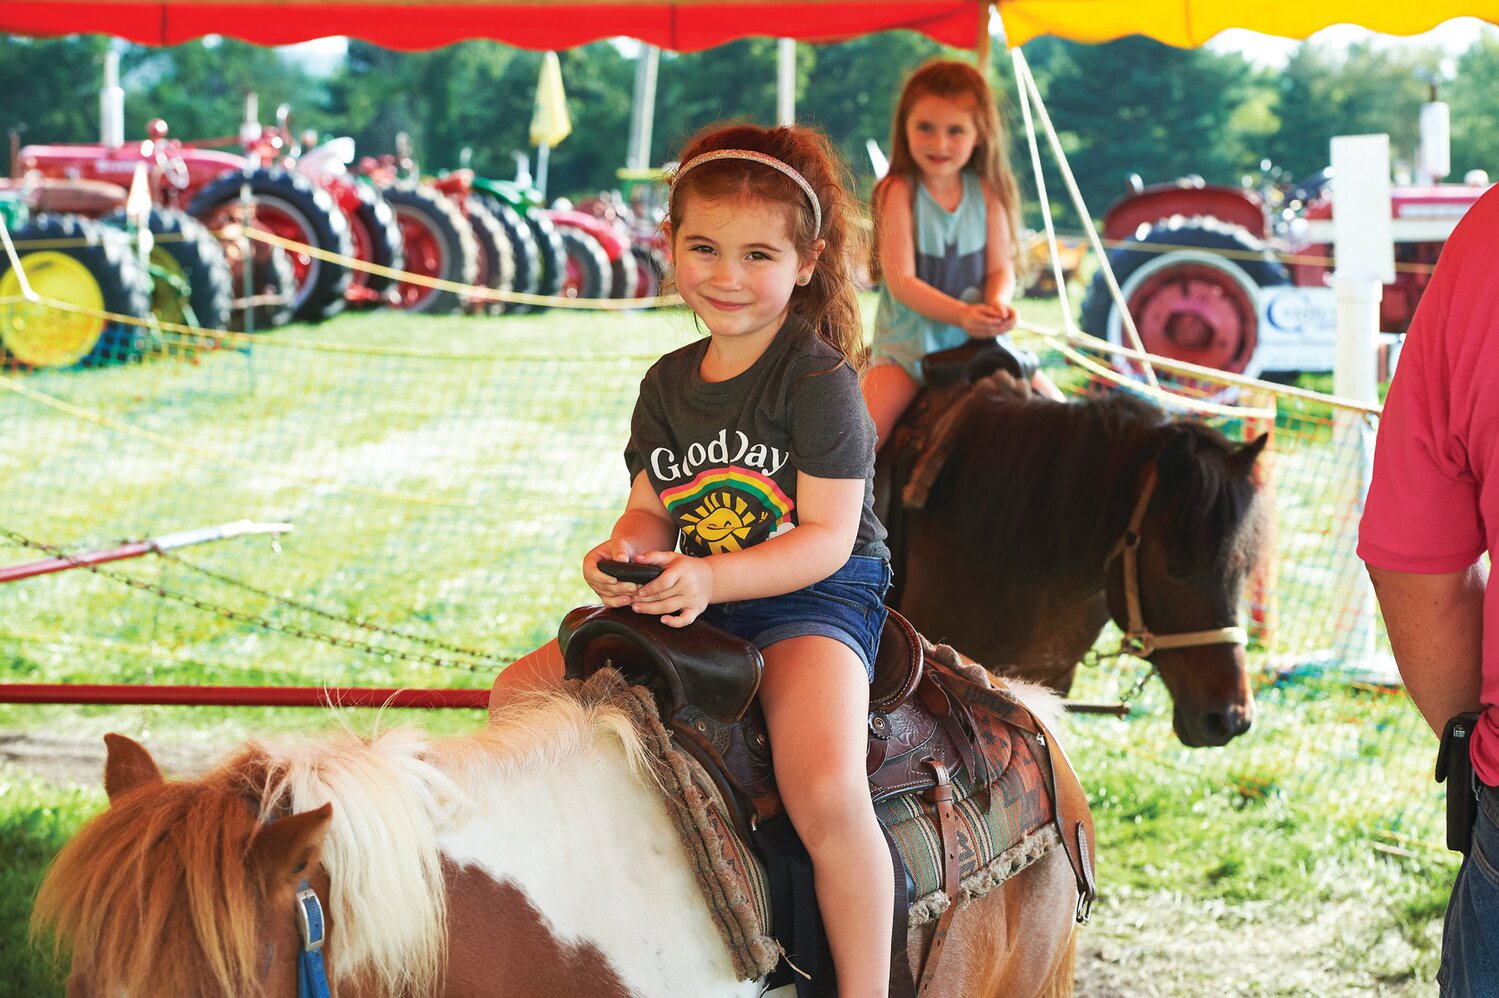 Children ride the ponies at the Middletown Grange Fair in Wrightstown Aug. 17.